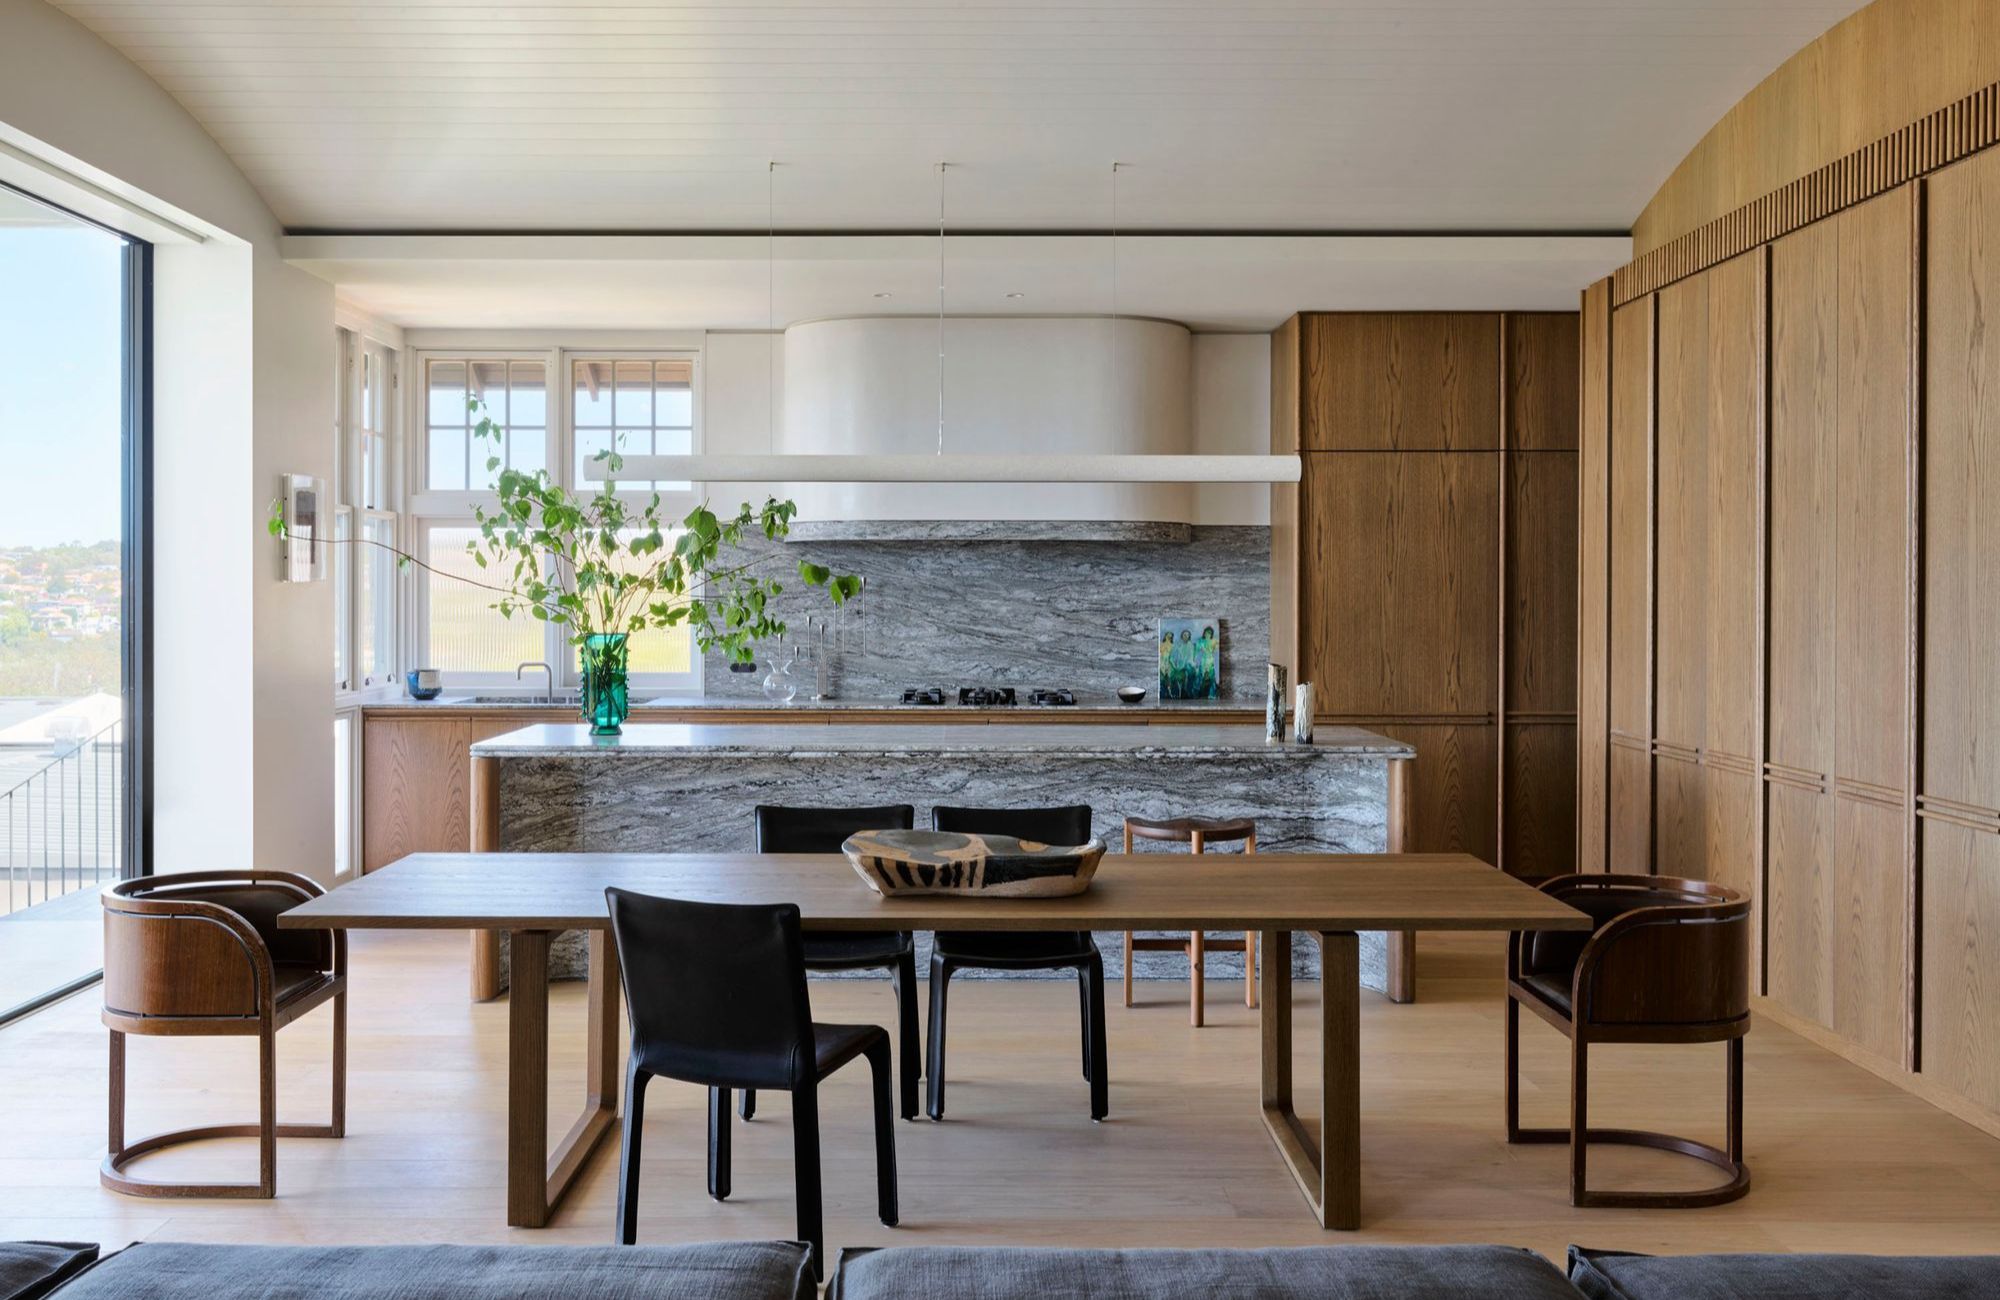 Ultramarine by Decus and Luigi Rosselli Architects. Kitchen and dining room view